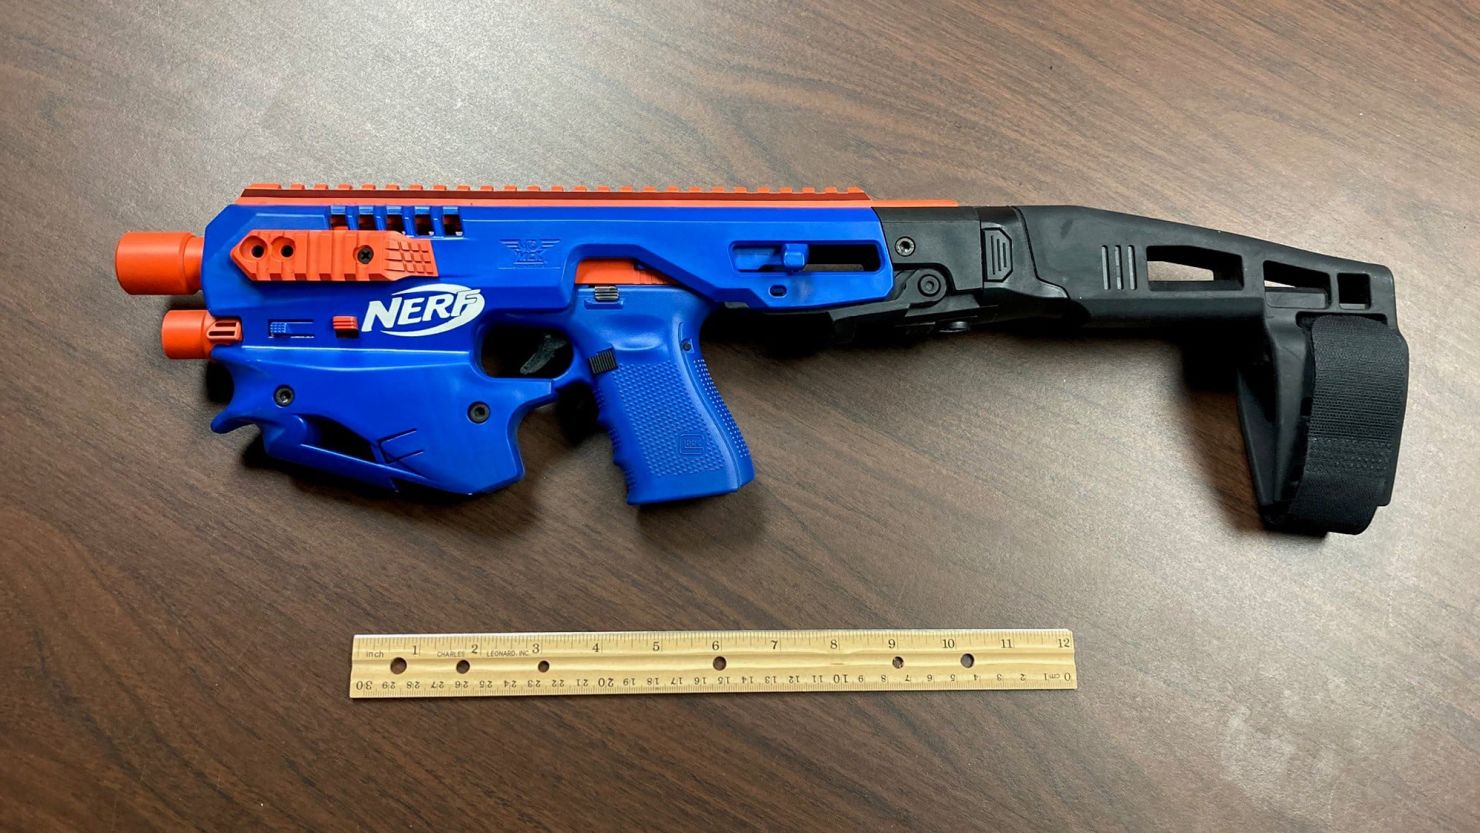 Nerf gun: Real weapon disguised as toy found in drug raid